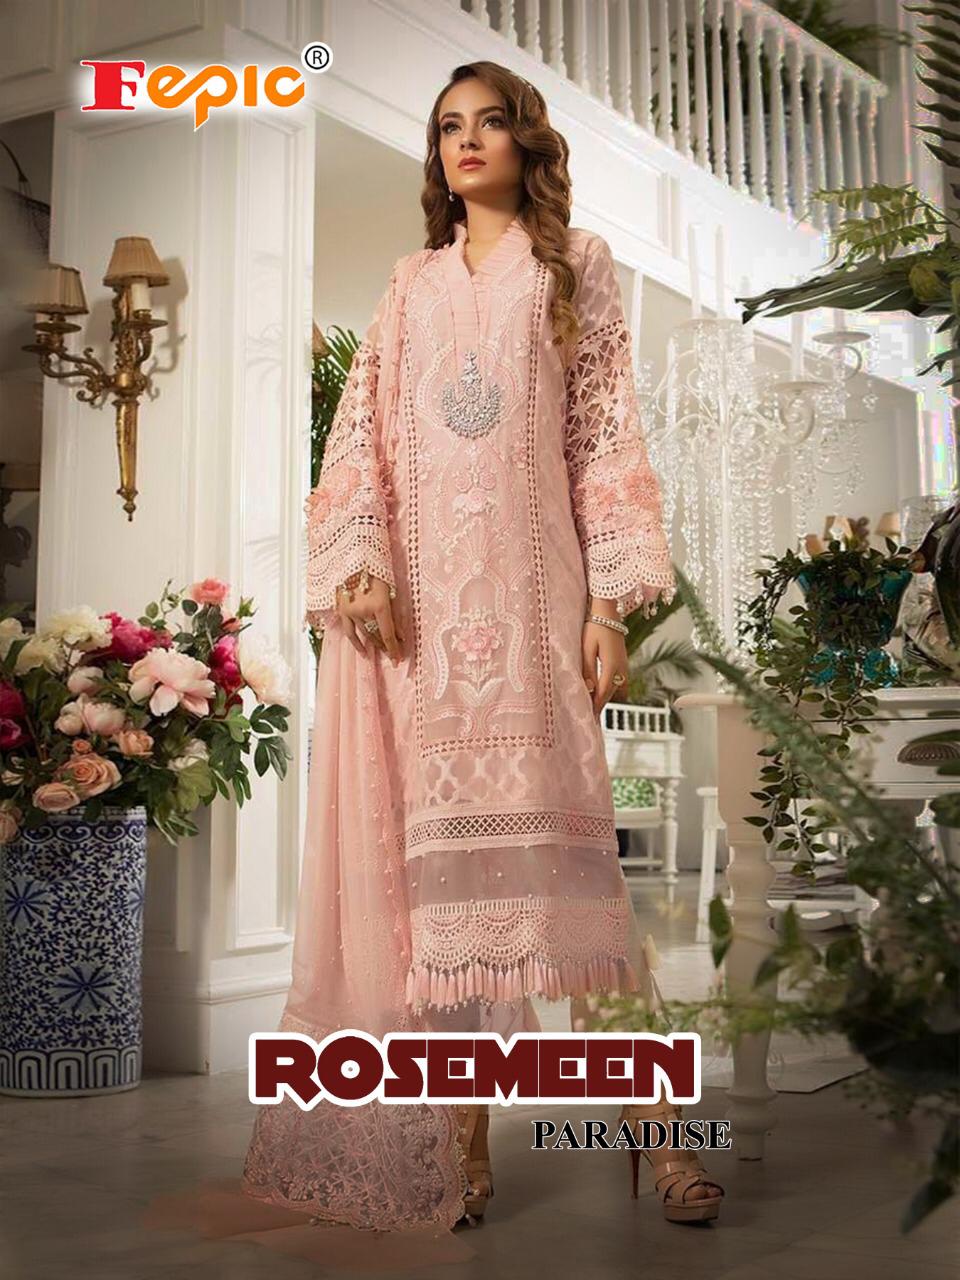 fepic rosemeen paradise colorful fancy collection of salwaar suits